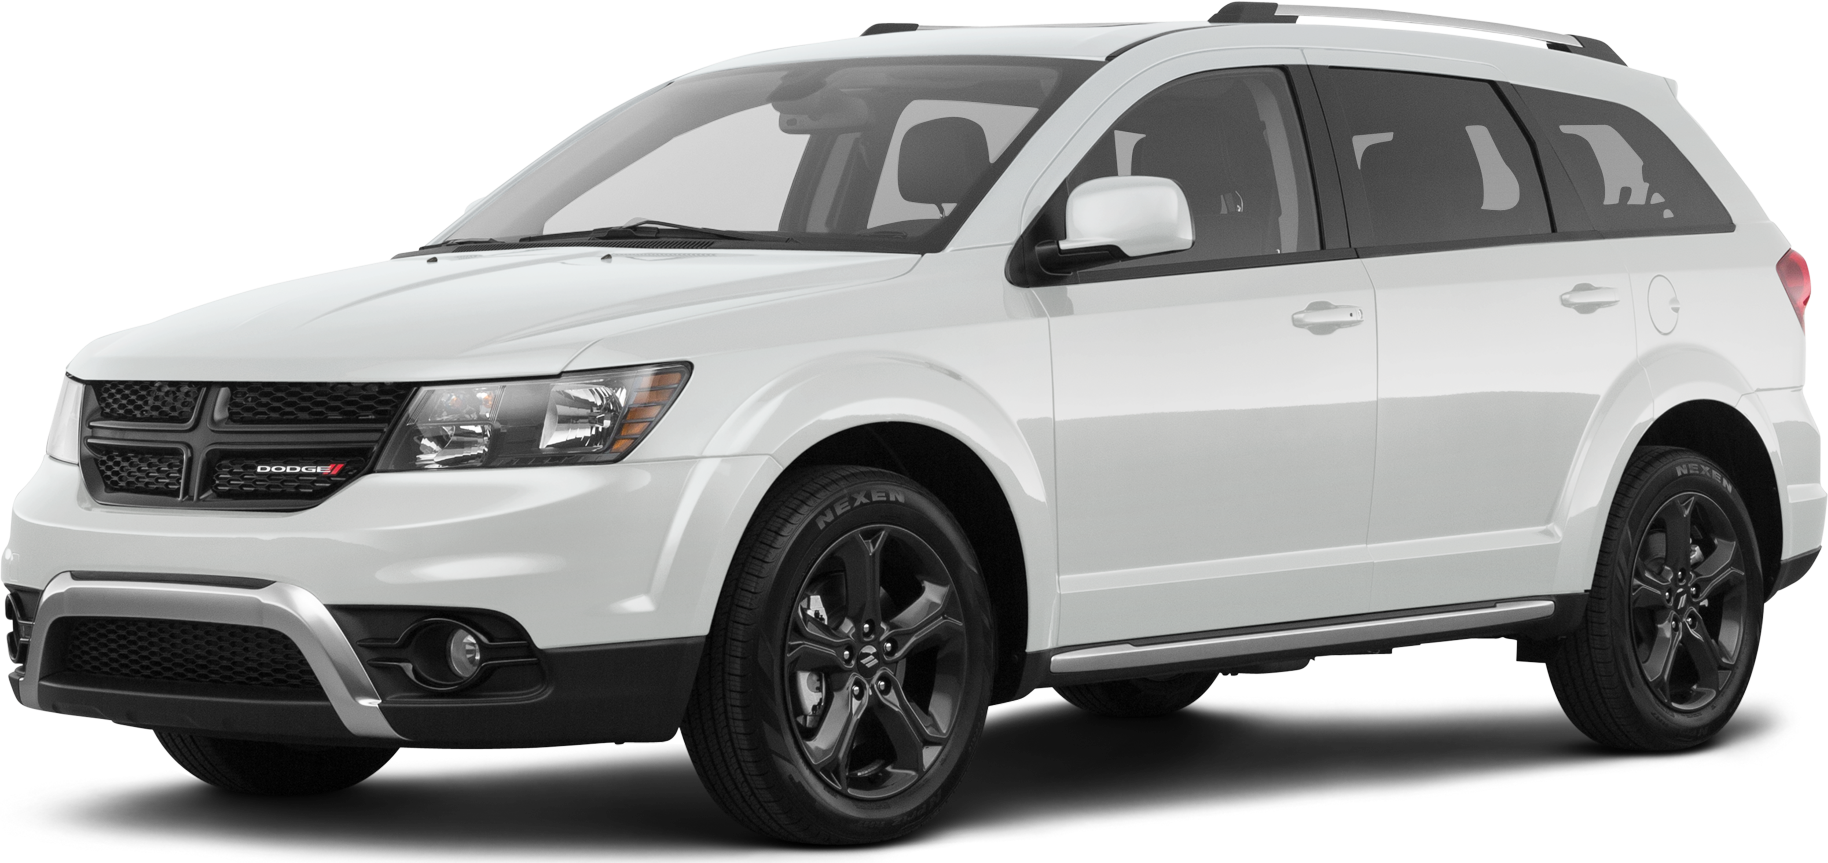 dodge-journey-specs-the-story-of-dodge-journey-specs-has-just-gone